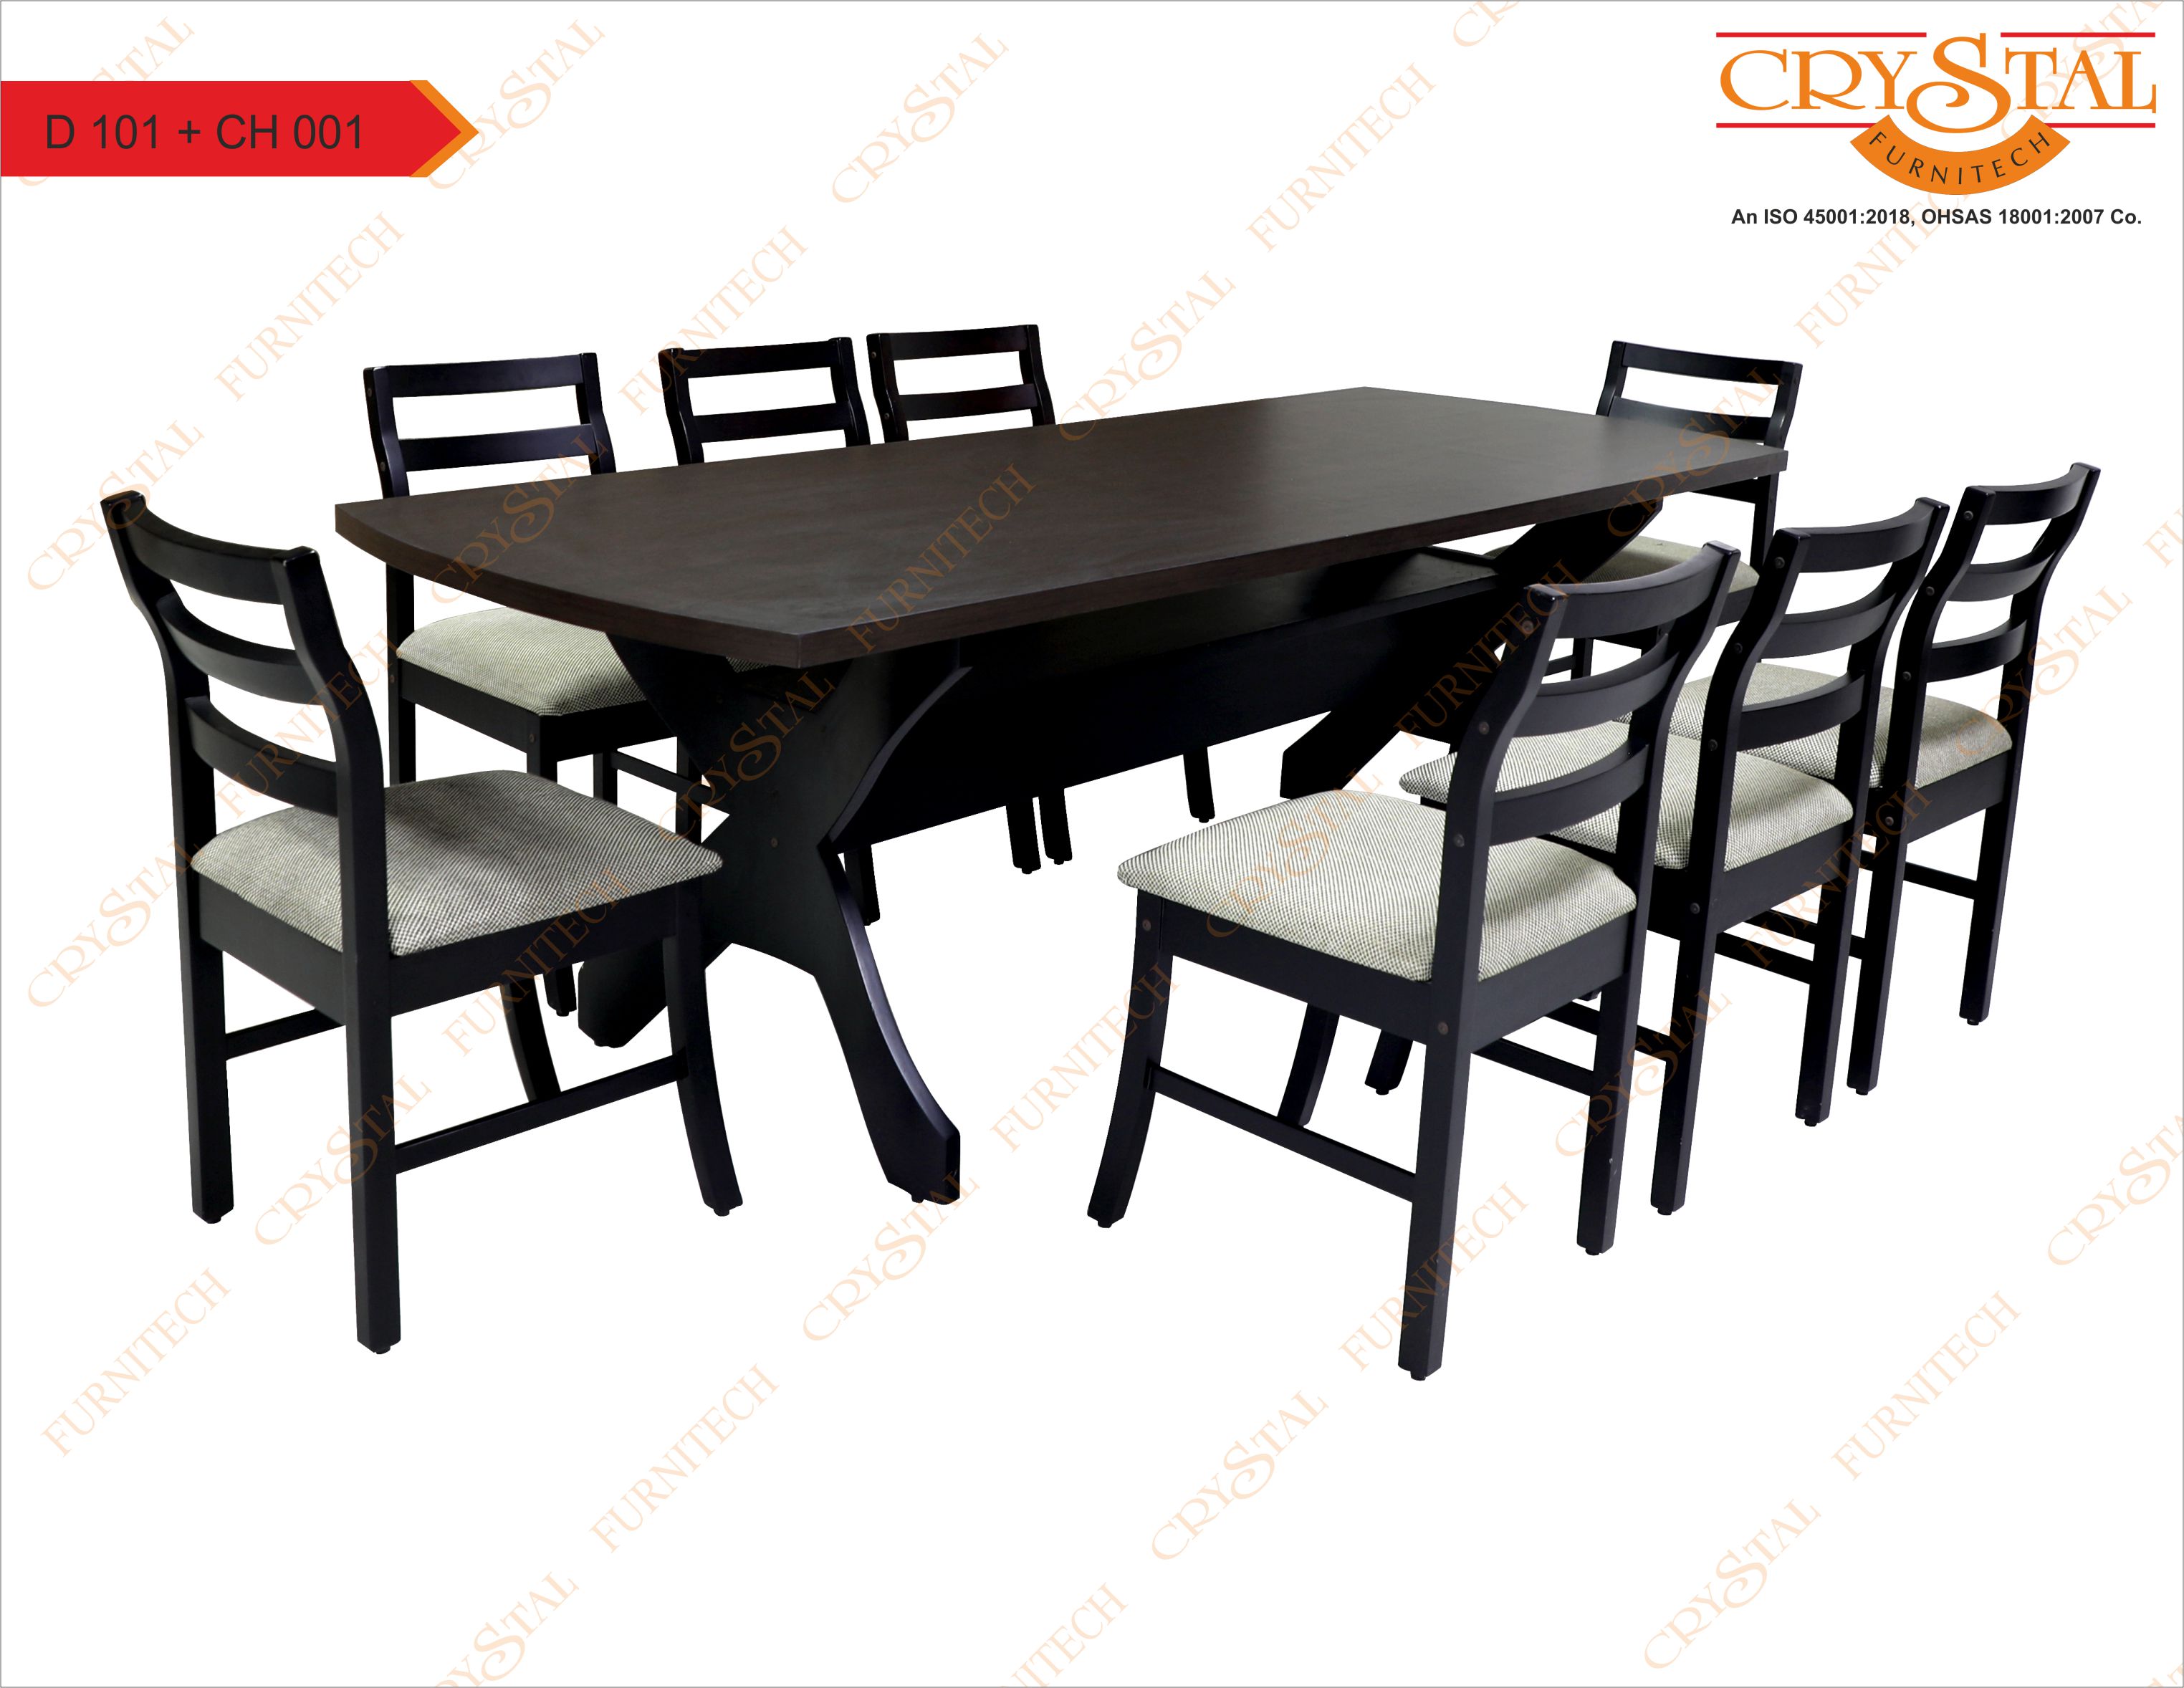 images/products/Dining-Set-Dining-Set-D-101+CH001_1657002565.jpg